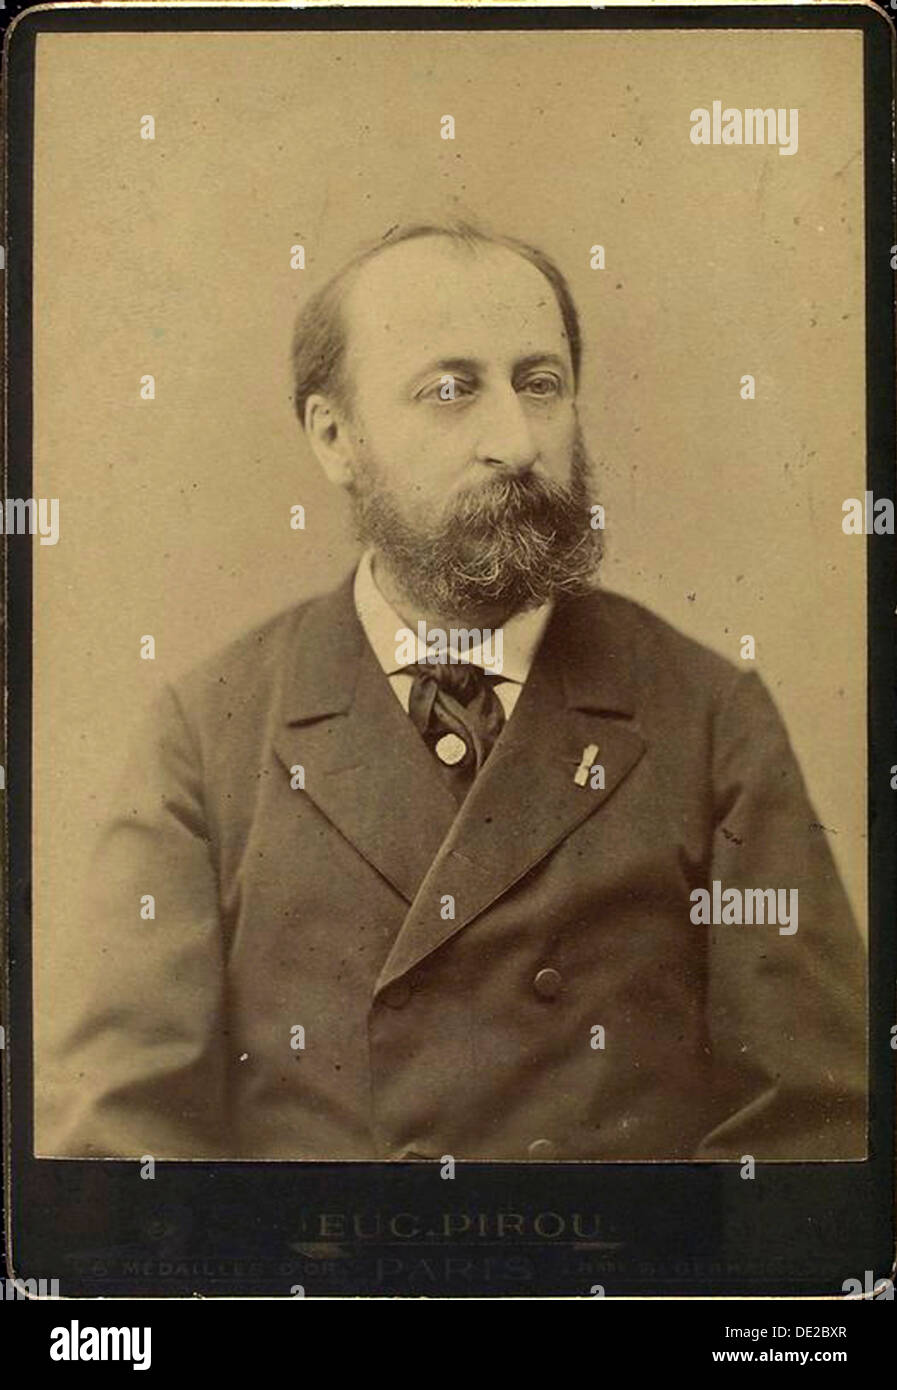 Camille Saint-Saens, French composer, conductor, organist and pianist, late 19th century. Artist: Eugene Pirou Stock Photo